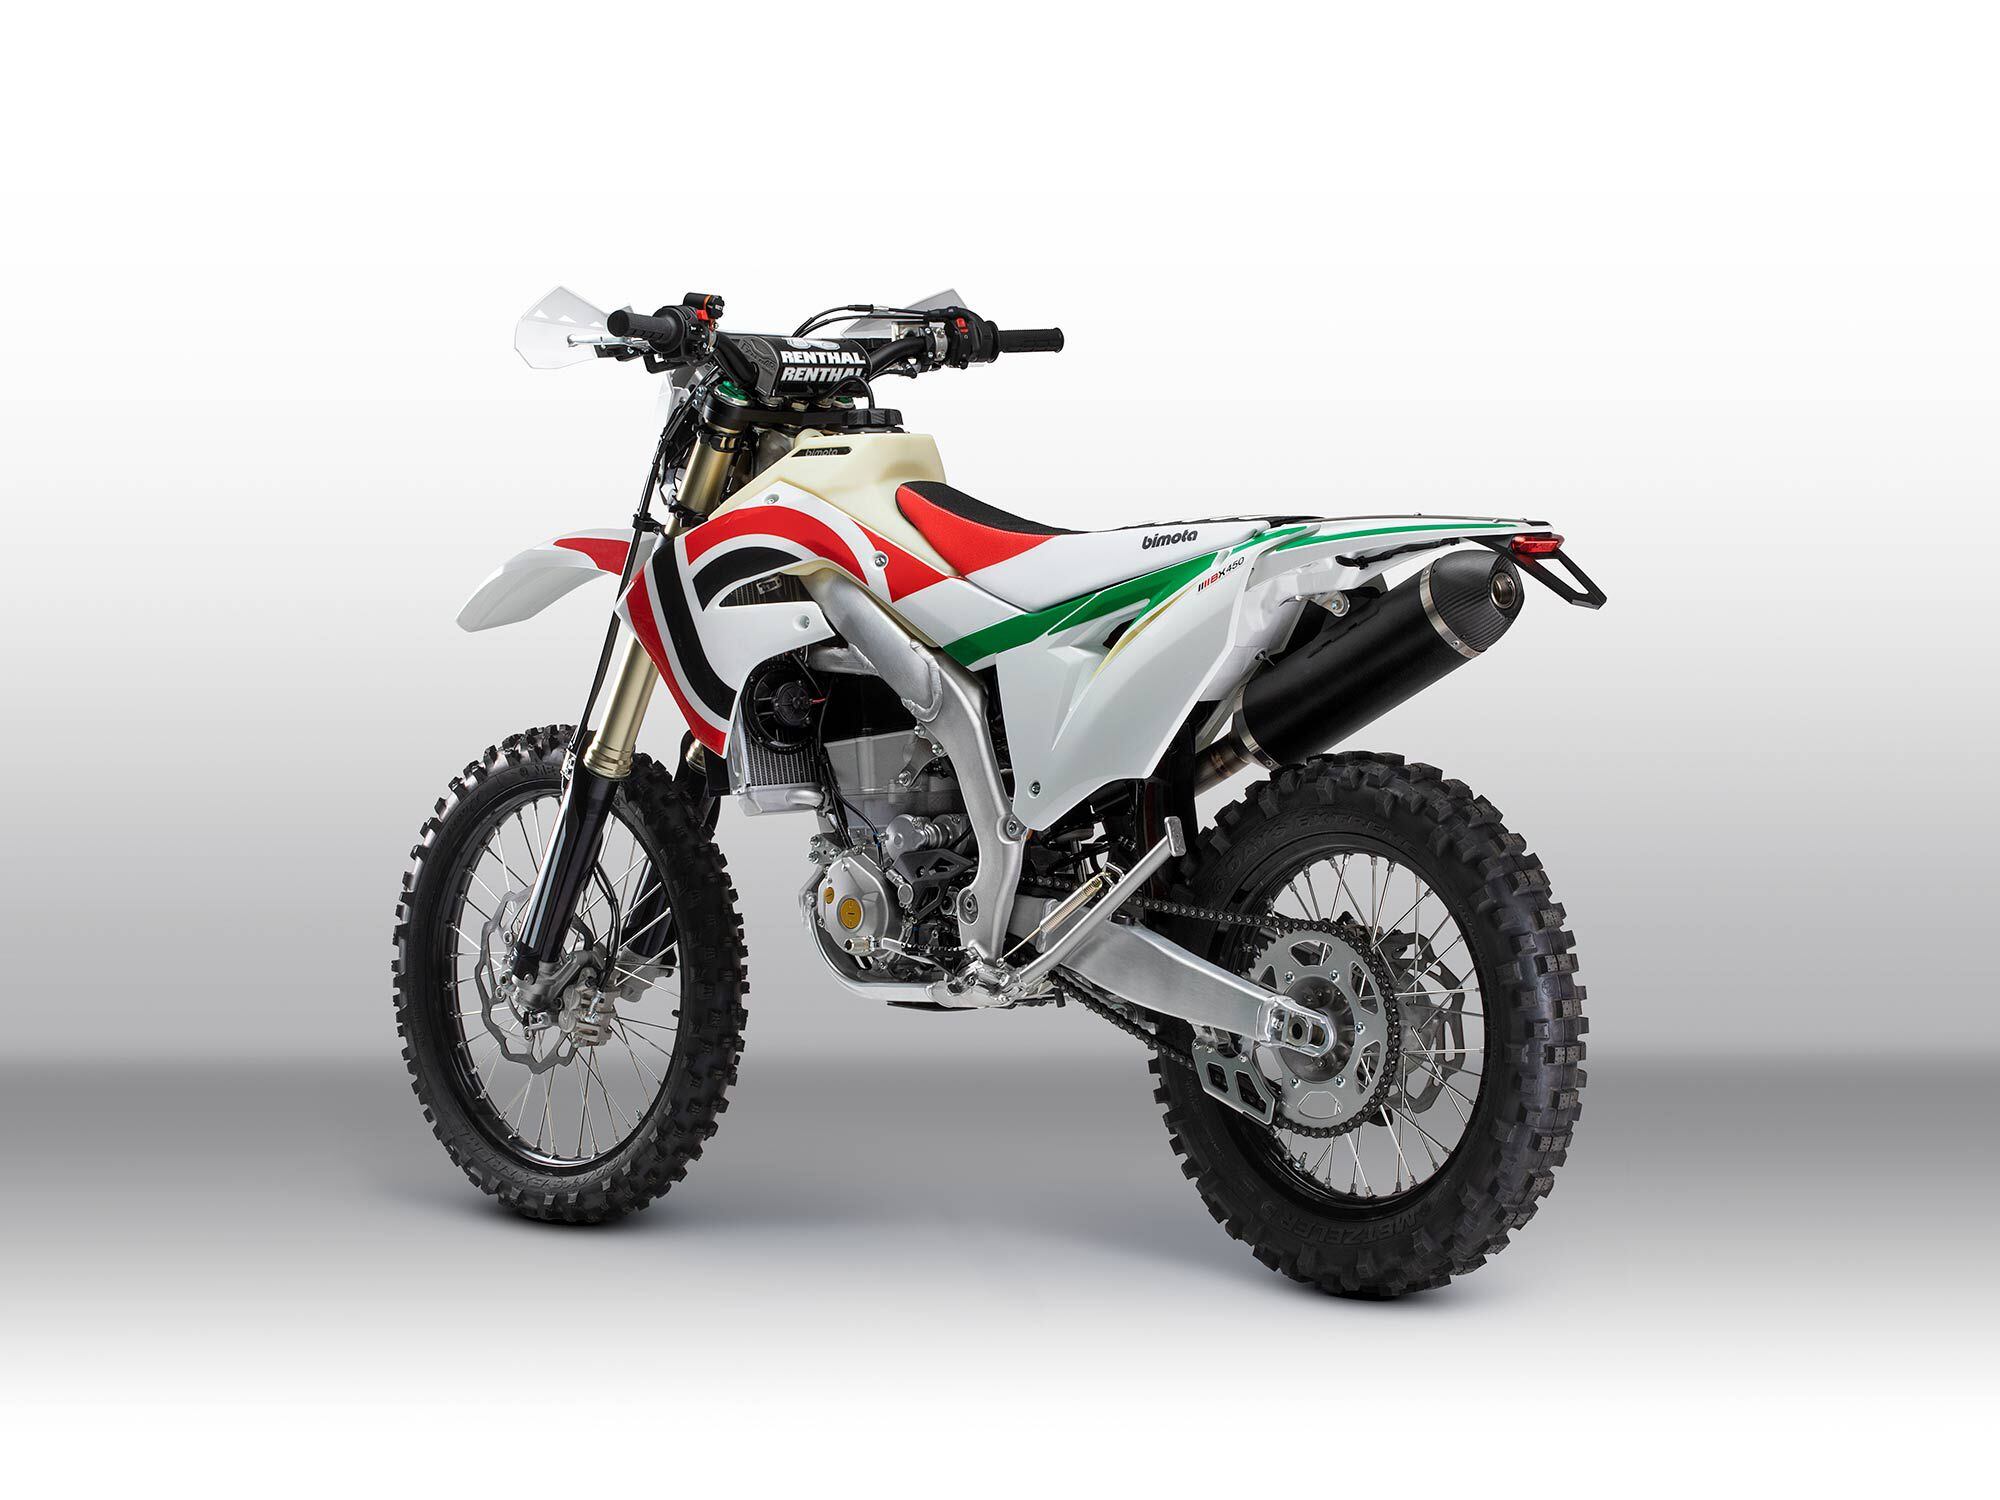 The BX450 updates the K450X with lighting, a larger fuel tank, Metzeler 6 Days Extreme tires, and more.